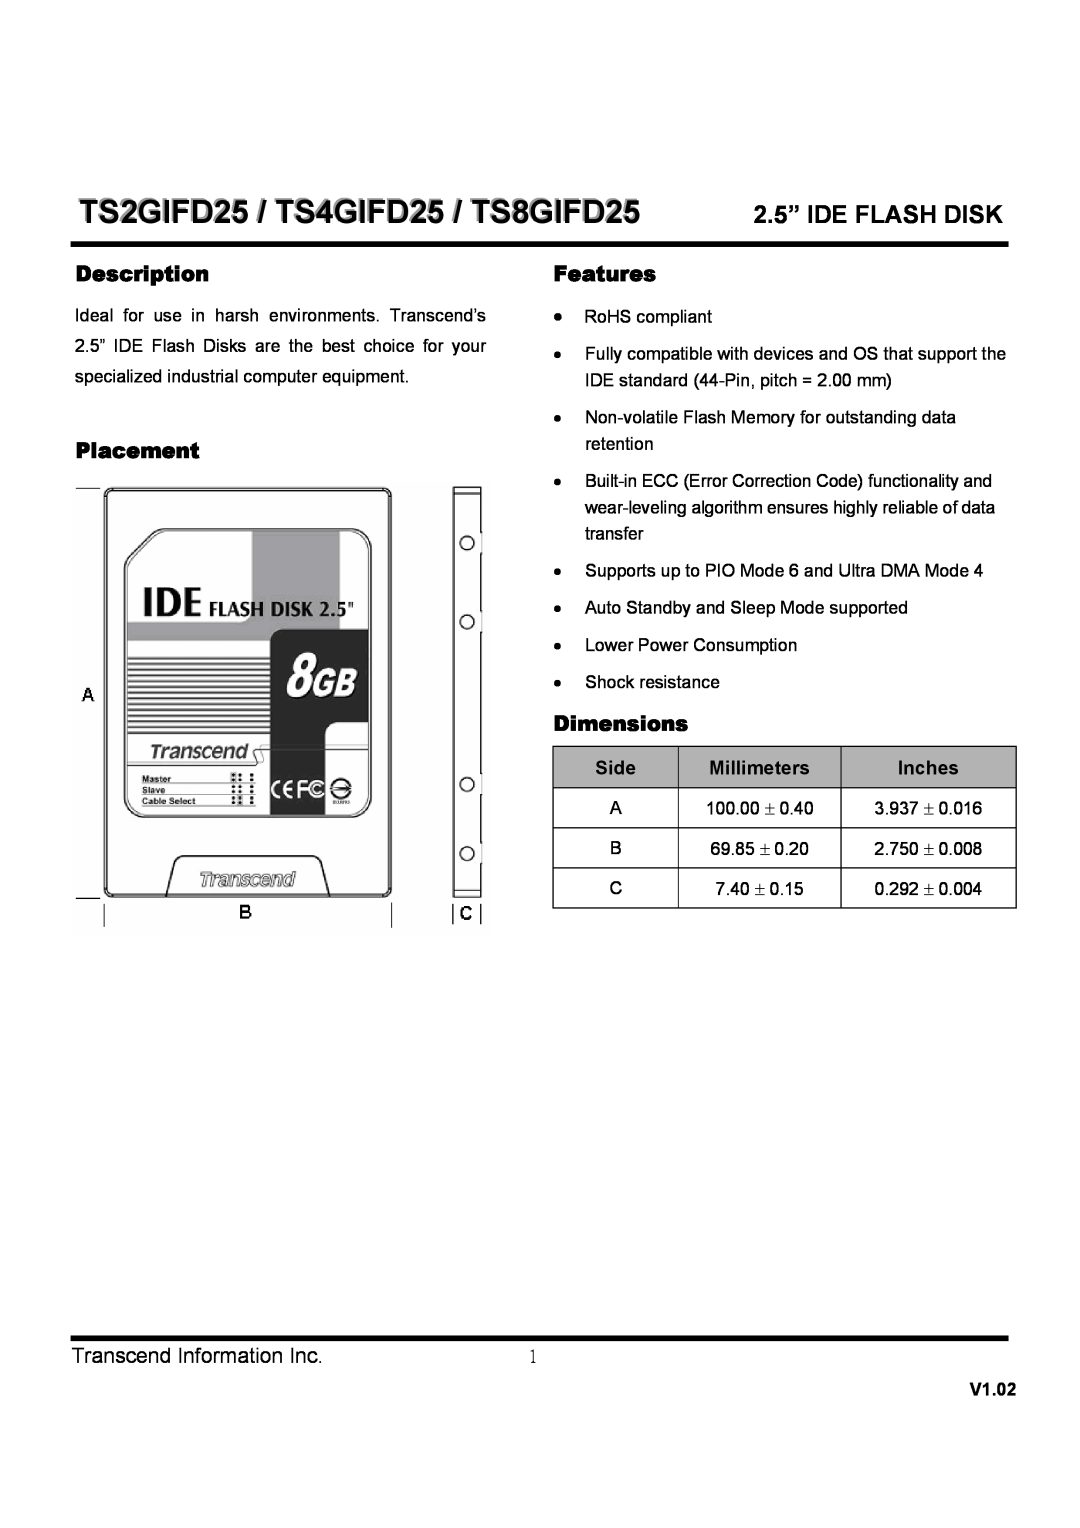 Transcend Information dimensions TS2GIFD25 / TS4GIFD25 / TS8GIFD25, 2.5” IDE FLASH DISK, Description, Placement, Side 